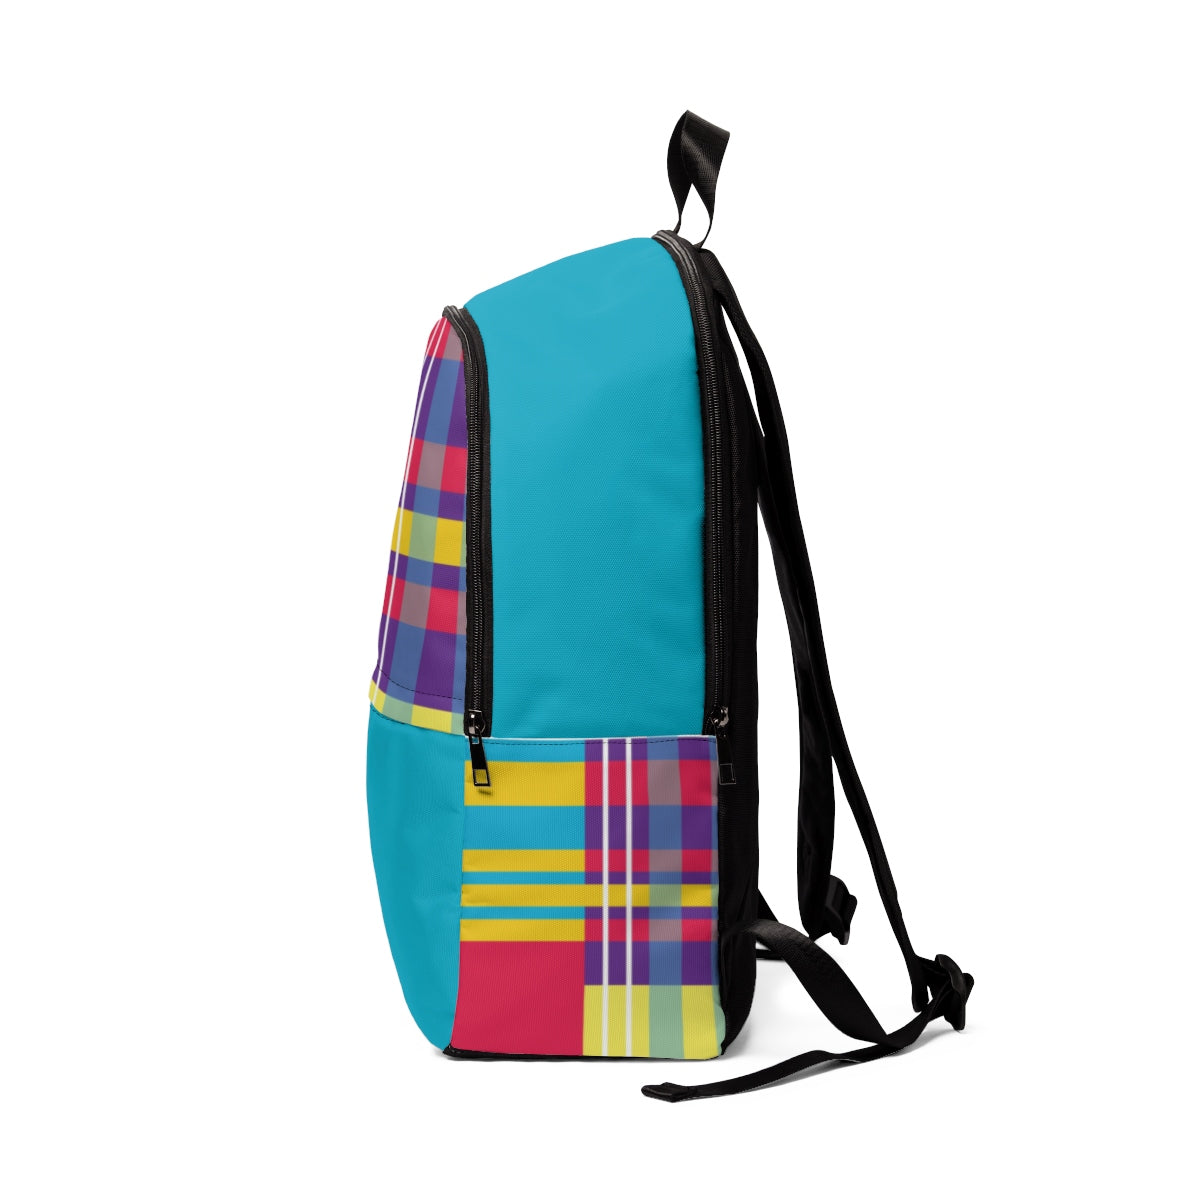 MERRY PLAID Back pack (teal)